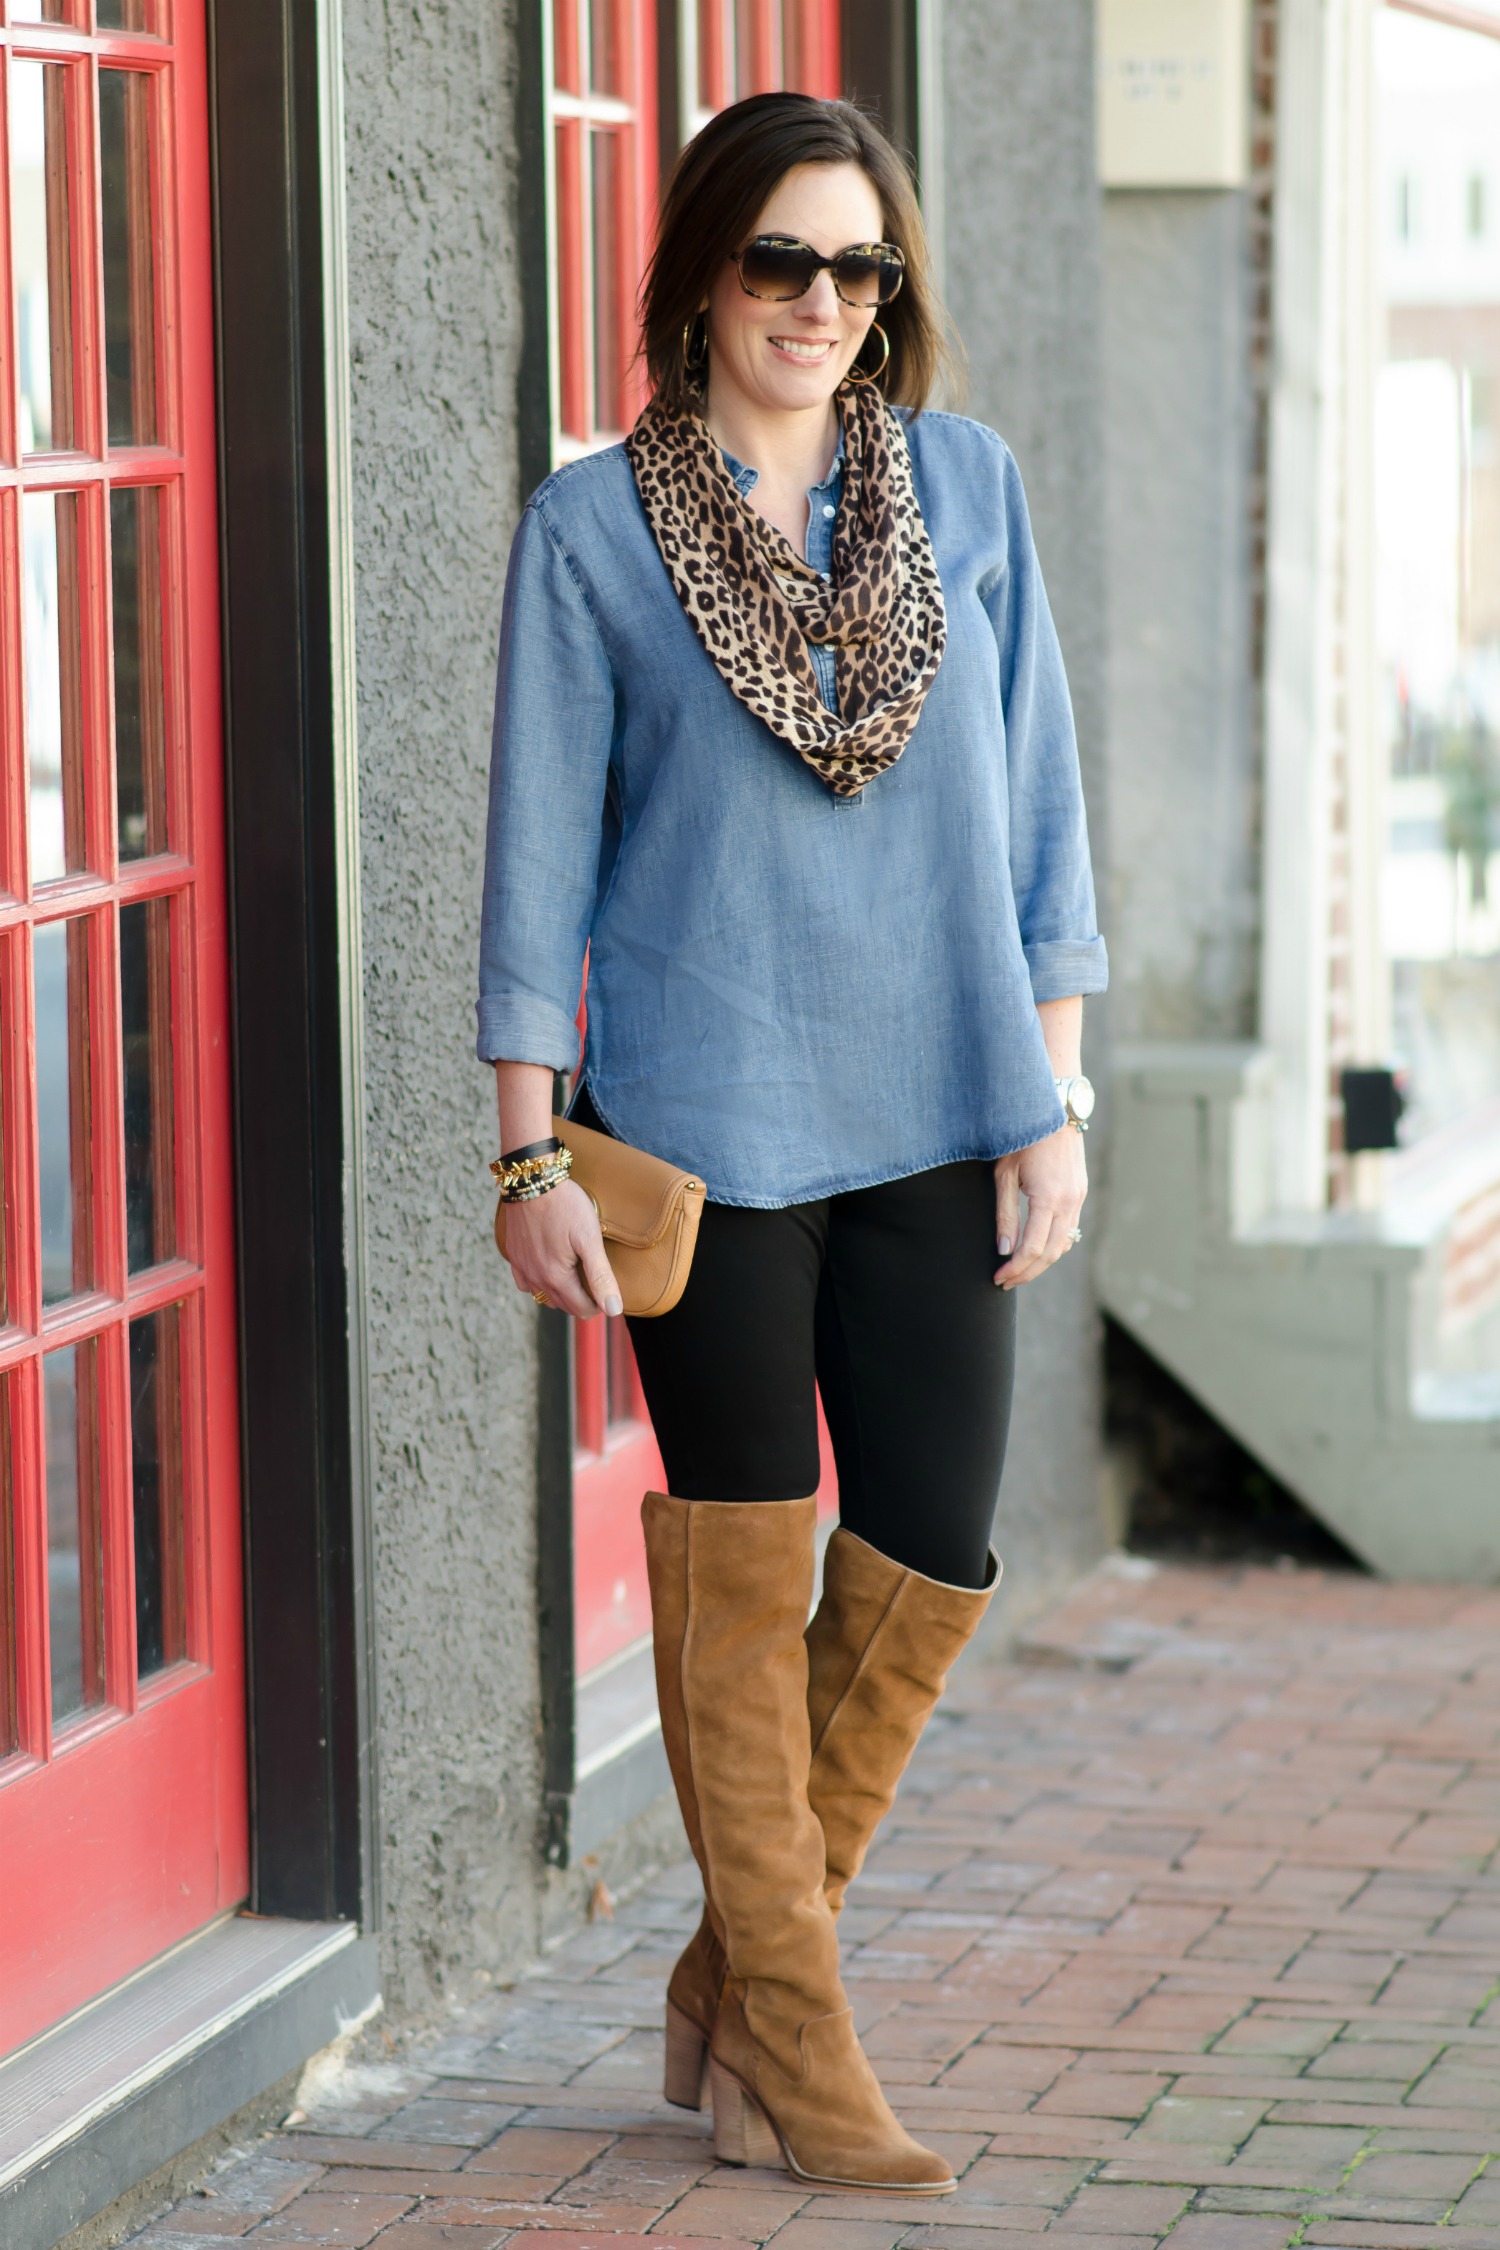 Thanksgiving Outfit Idea: Chambray Shirt and Leopard Scarf with Leggings and brown Over the Knee Boots